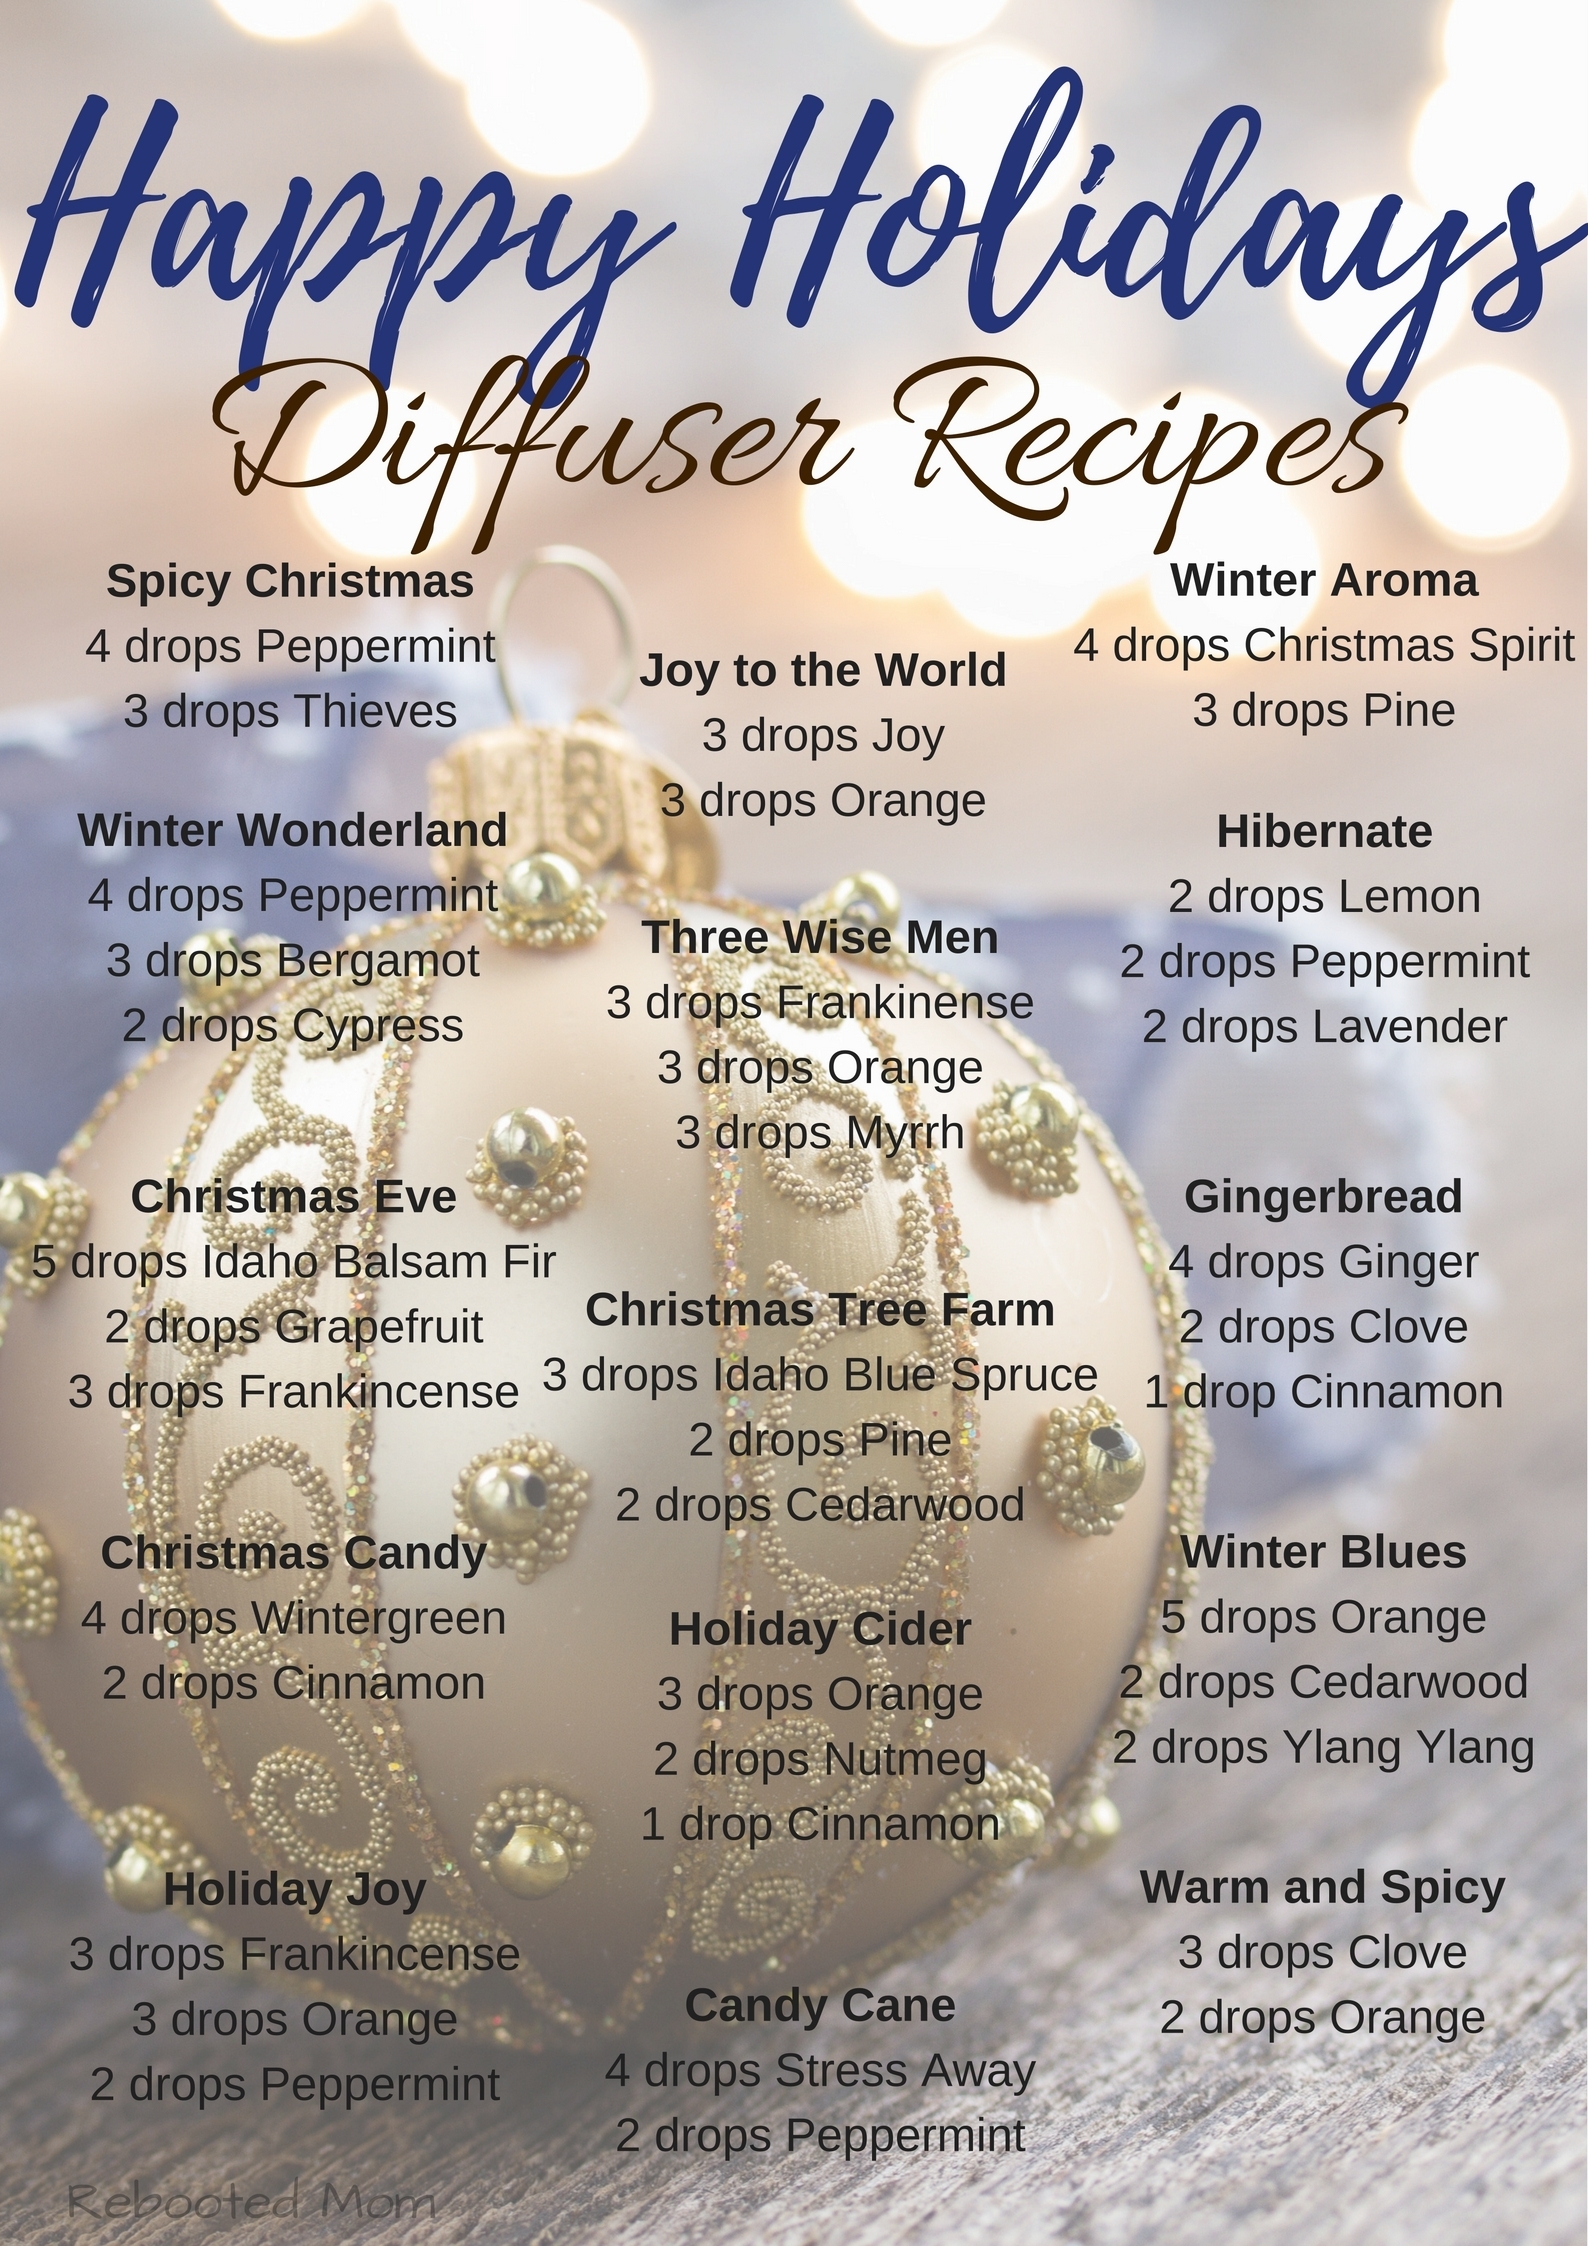 Ditch those candles and pull out that diffuser for some Happy Holidays Diffuser Recipes!